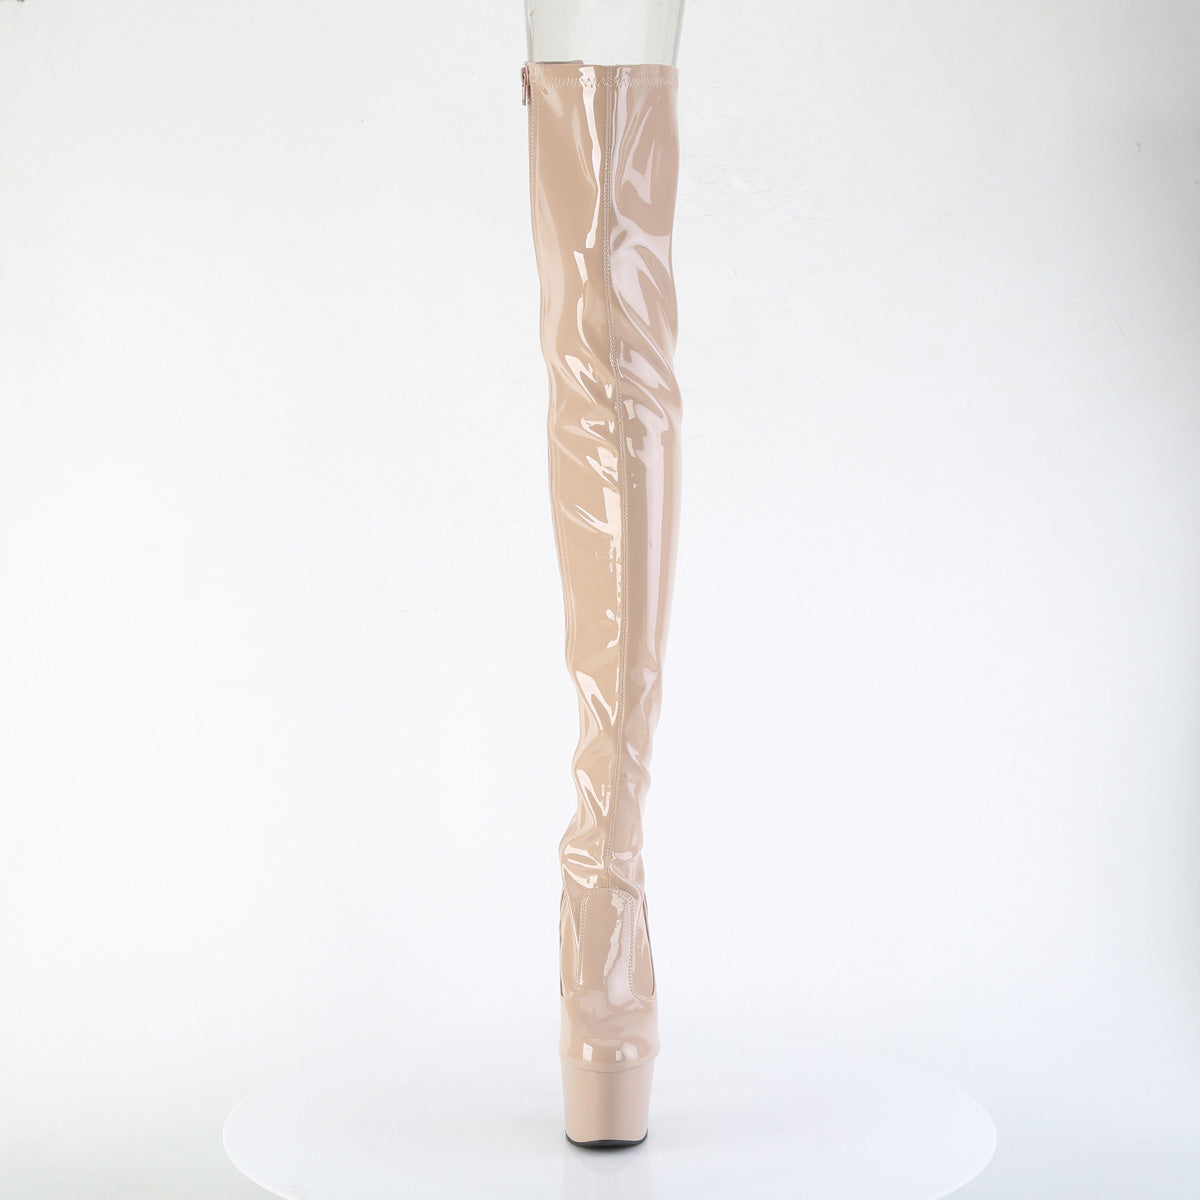 ADORE-3850 Pleaser Nude Patent Pole Dancing Thigh High Boots